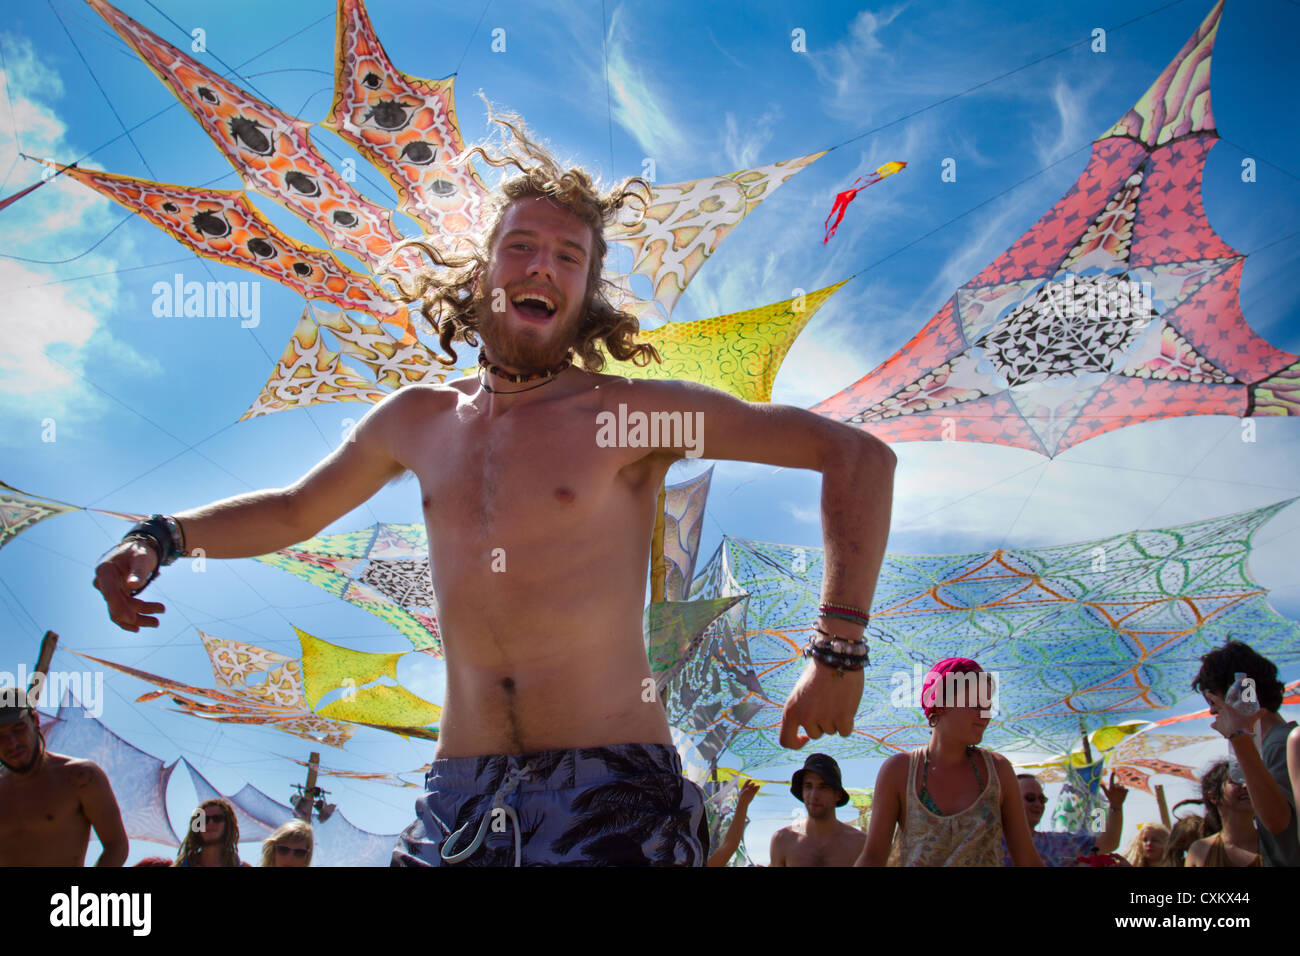 People attend the Lost Theory Festival in Croatia for a big trance open-air festival that lasts 6 days, 2012 Stock Photo